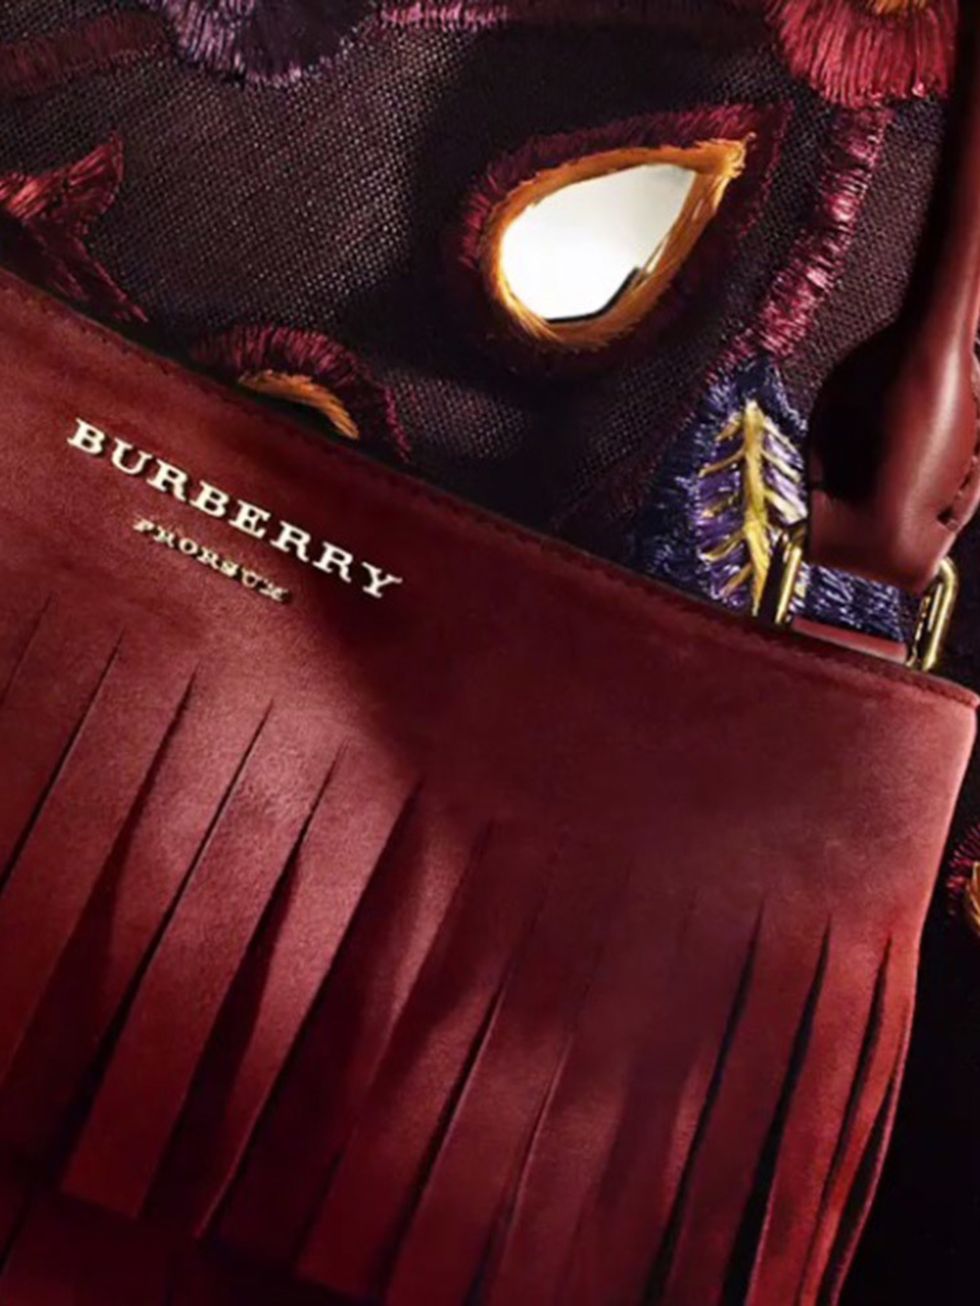 <p>Burberry (@burberry)</p>

<p>&#39;Coming soon - the #Burberry Autumn/Winter 2015 collection #LFW #Cinemagraph&#39;</p>